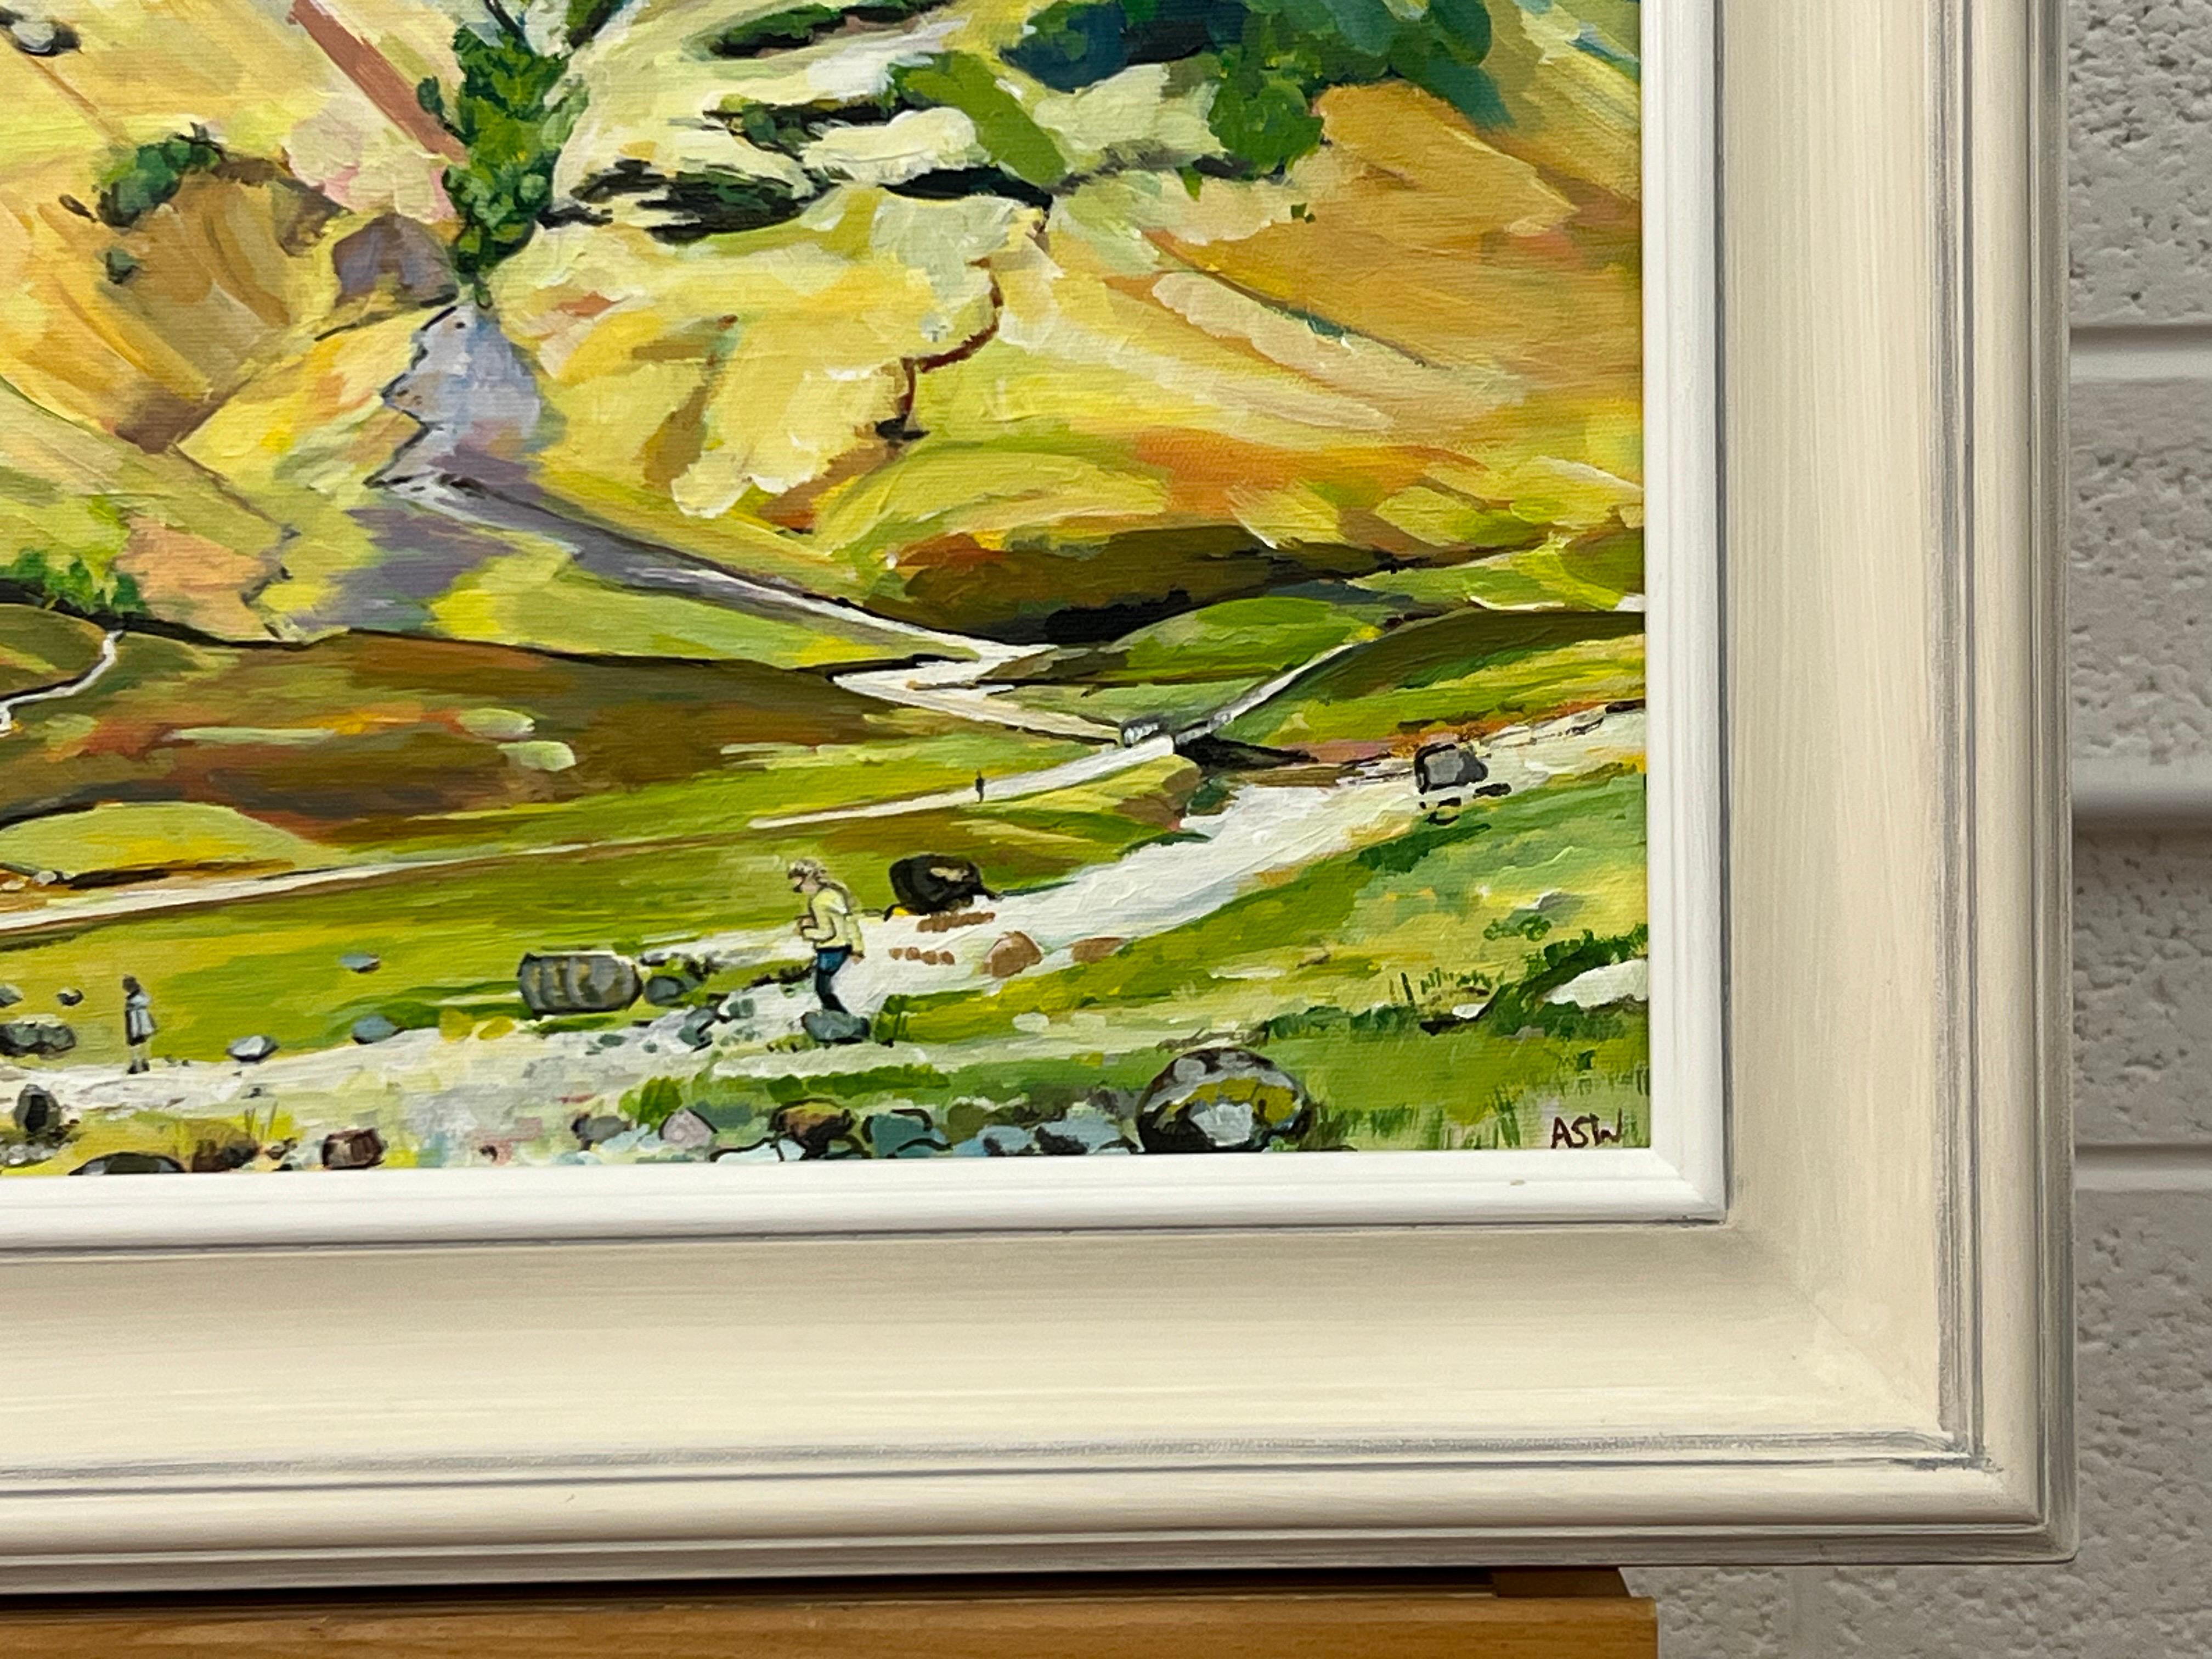 Scottish Highlands with Children Playing in the Mountains by Contemporary Artist For Sale 1